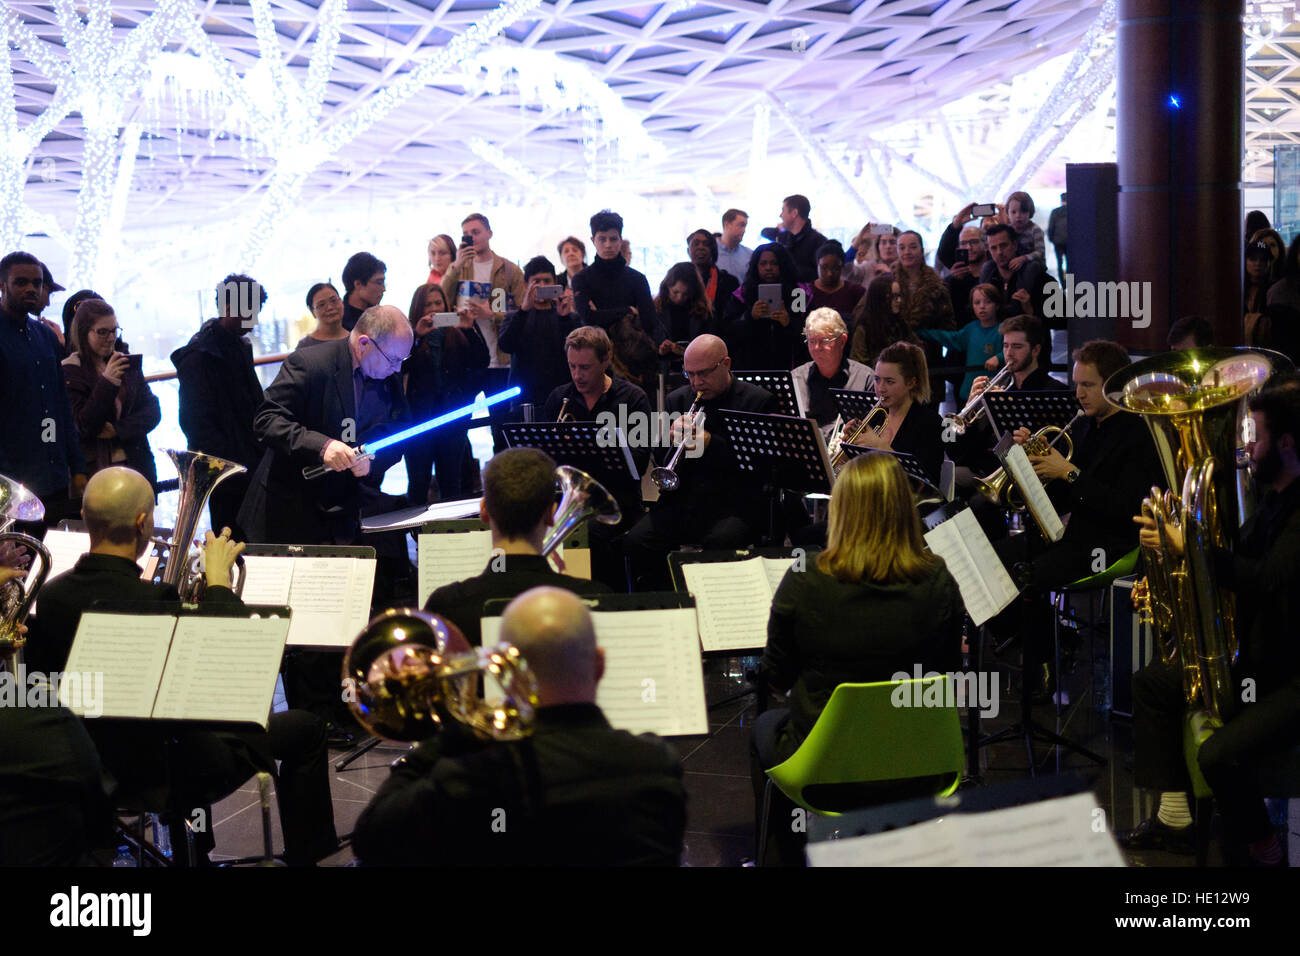 EDITORIAL USE ONLY Fans attending Vue at Westfield White City are treated to a live performance of John Williams' iconic score from 'Star Wars' performed by the Symphonic Brass of London to celebrate the nationwide release of 'Rogue One: A Star Wars Story' in cinemas. Stock Photo